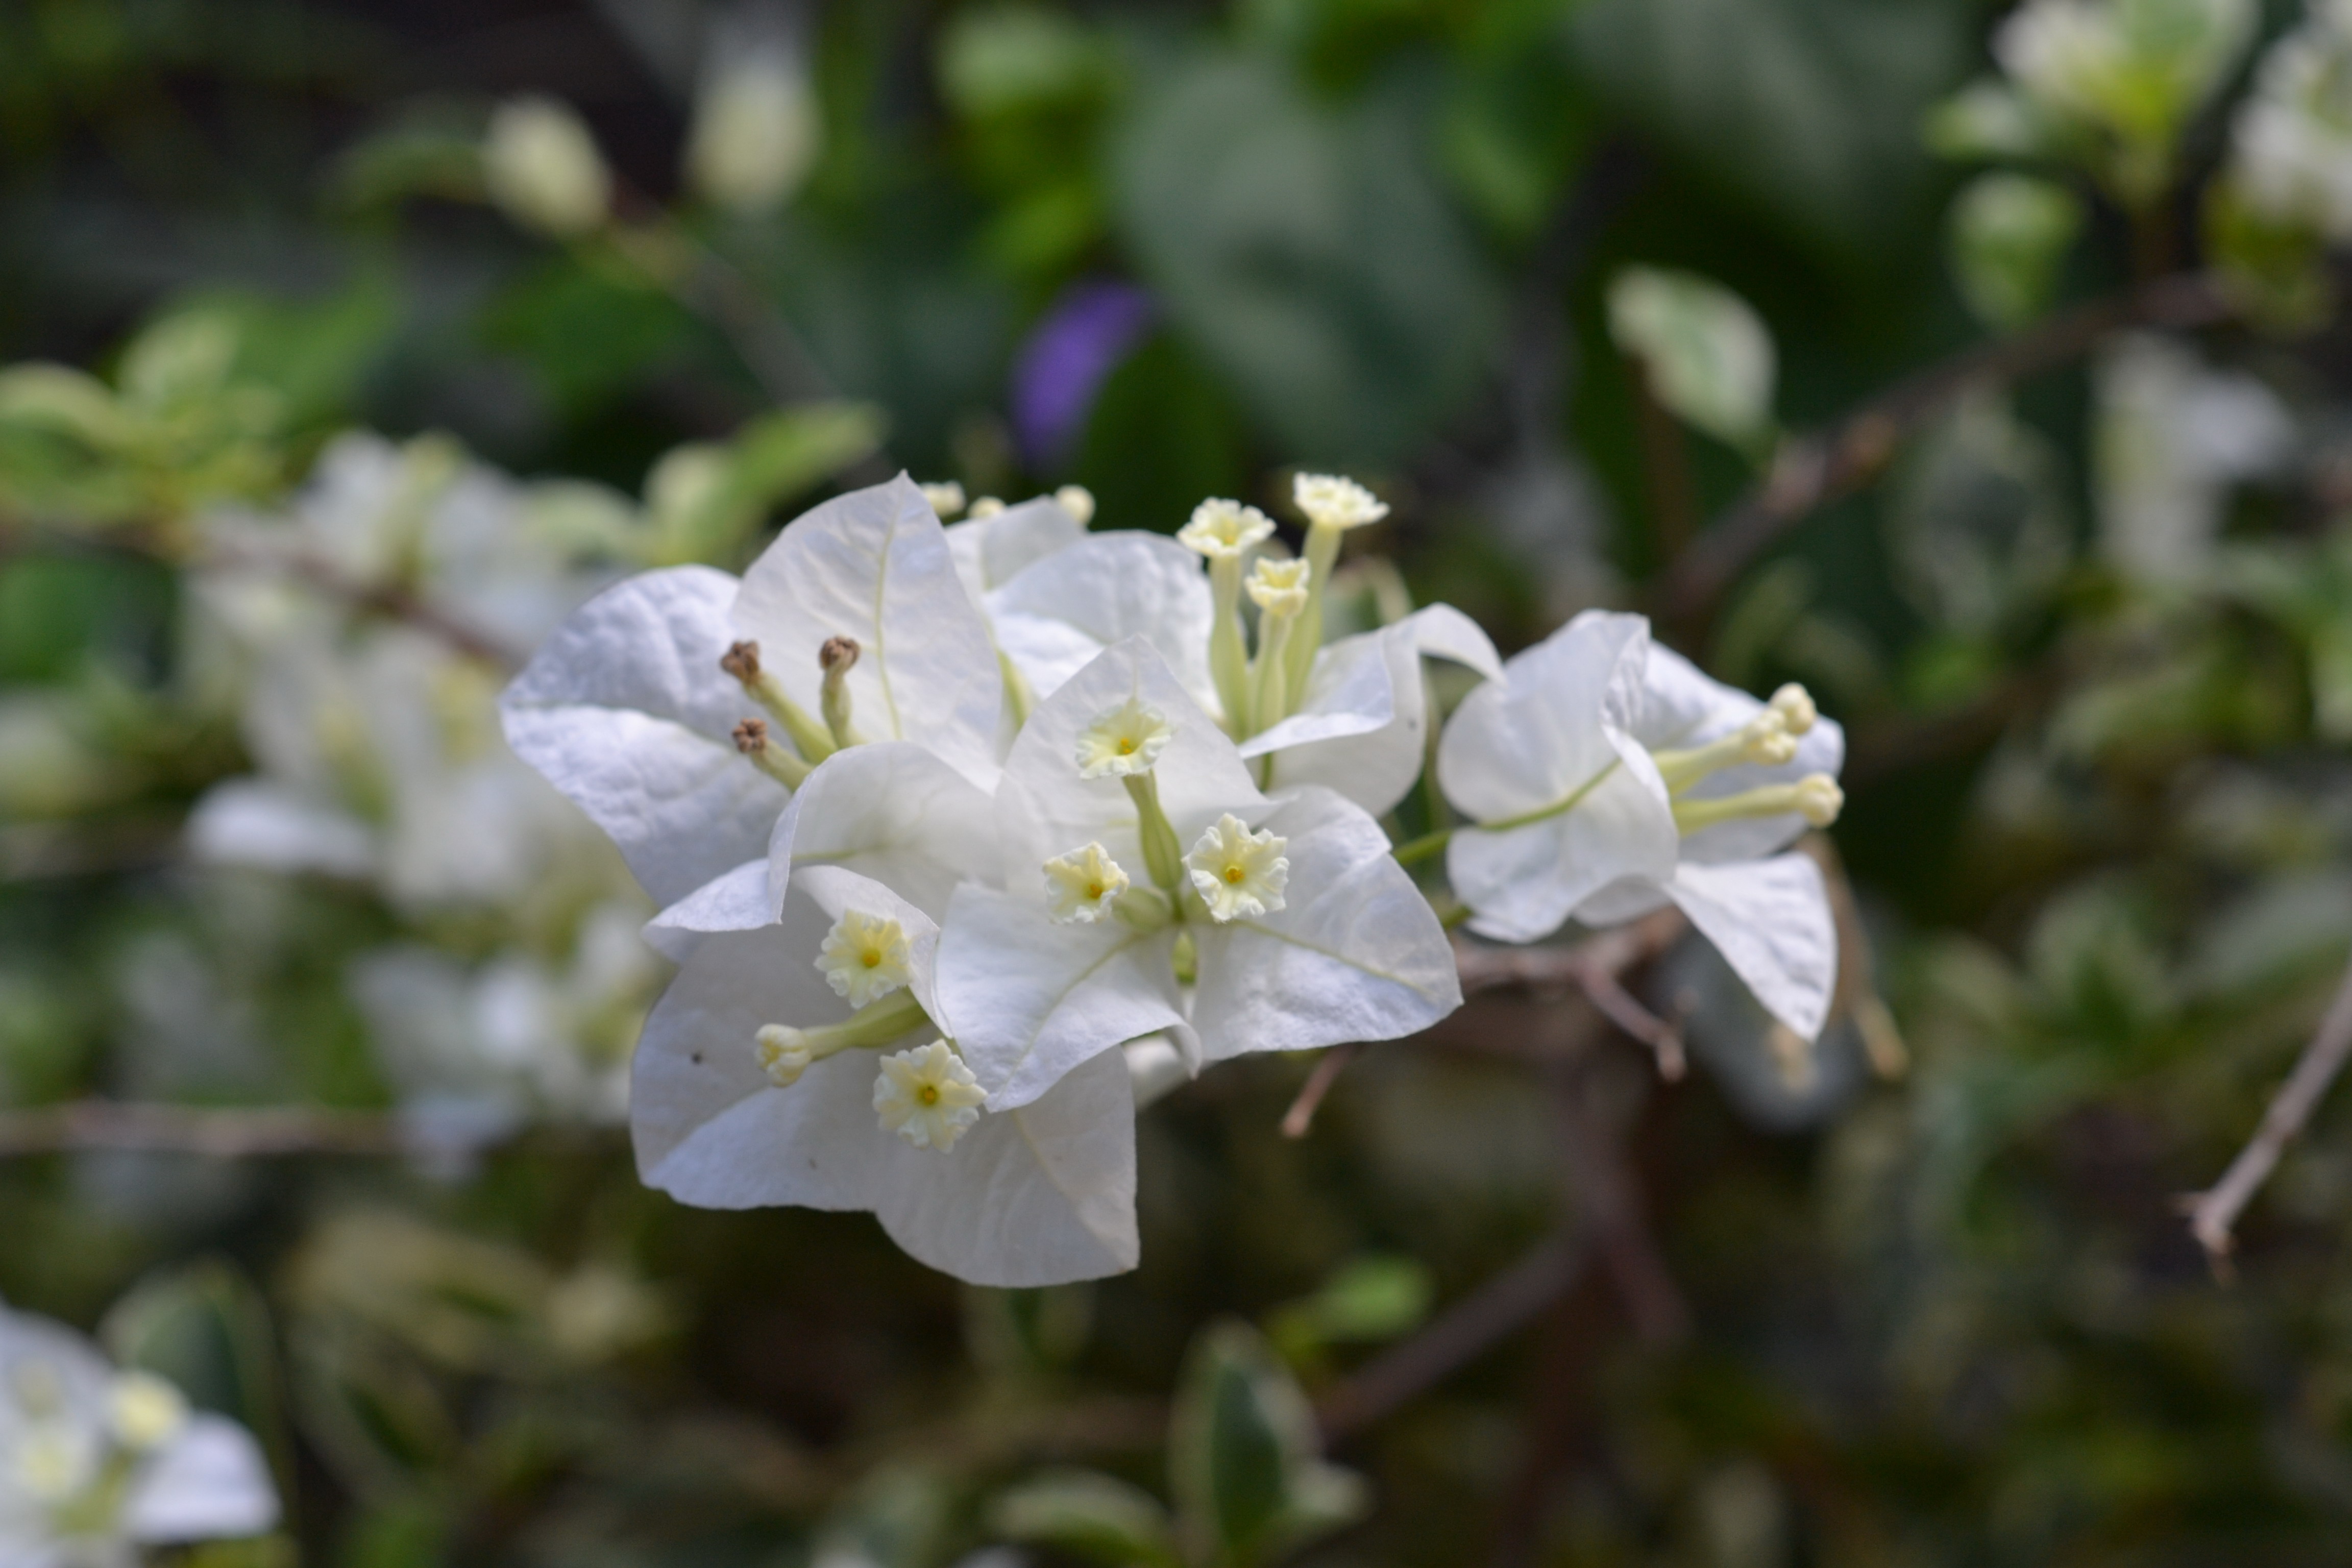 Clumps of white flowers photo